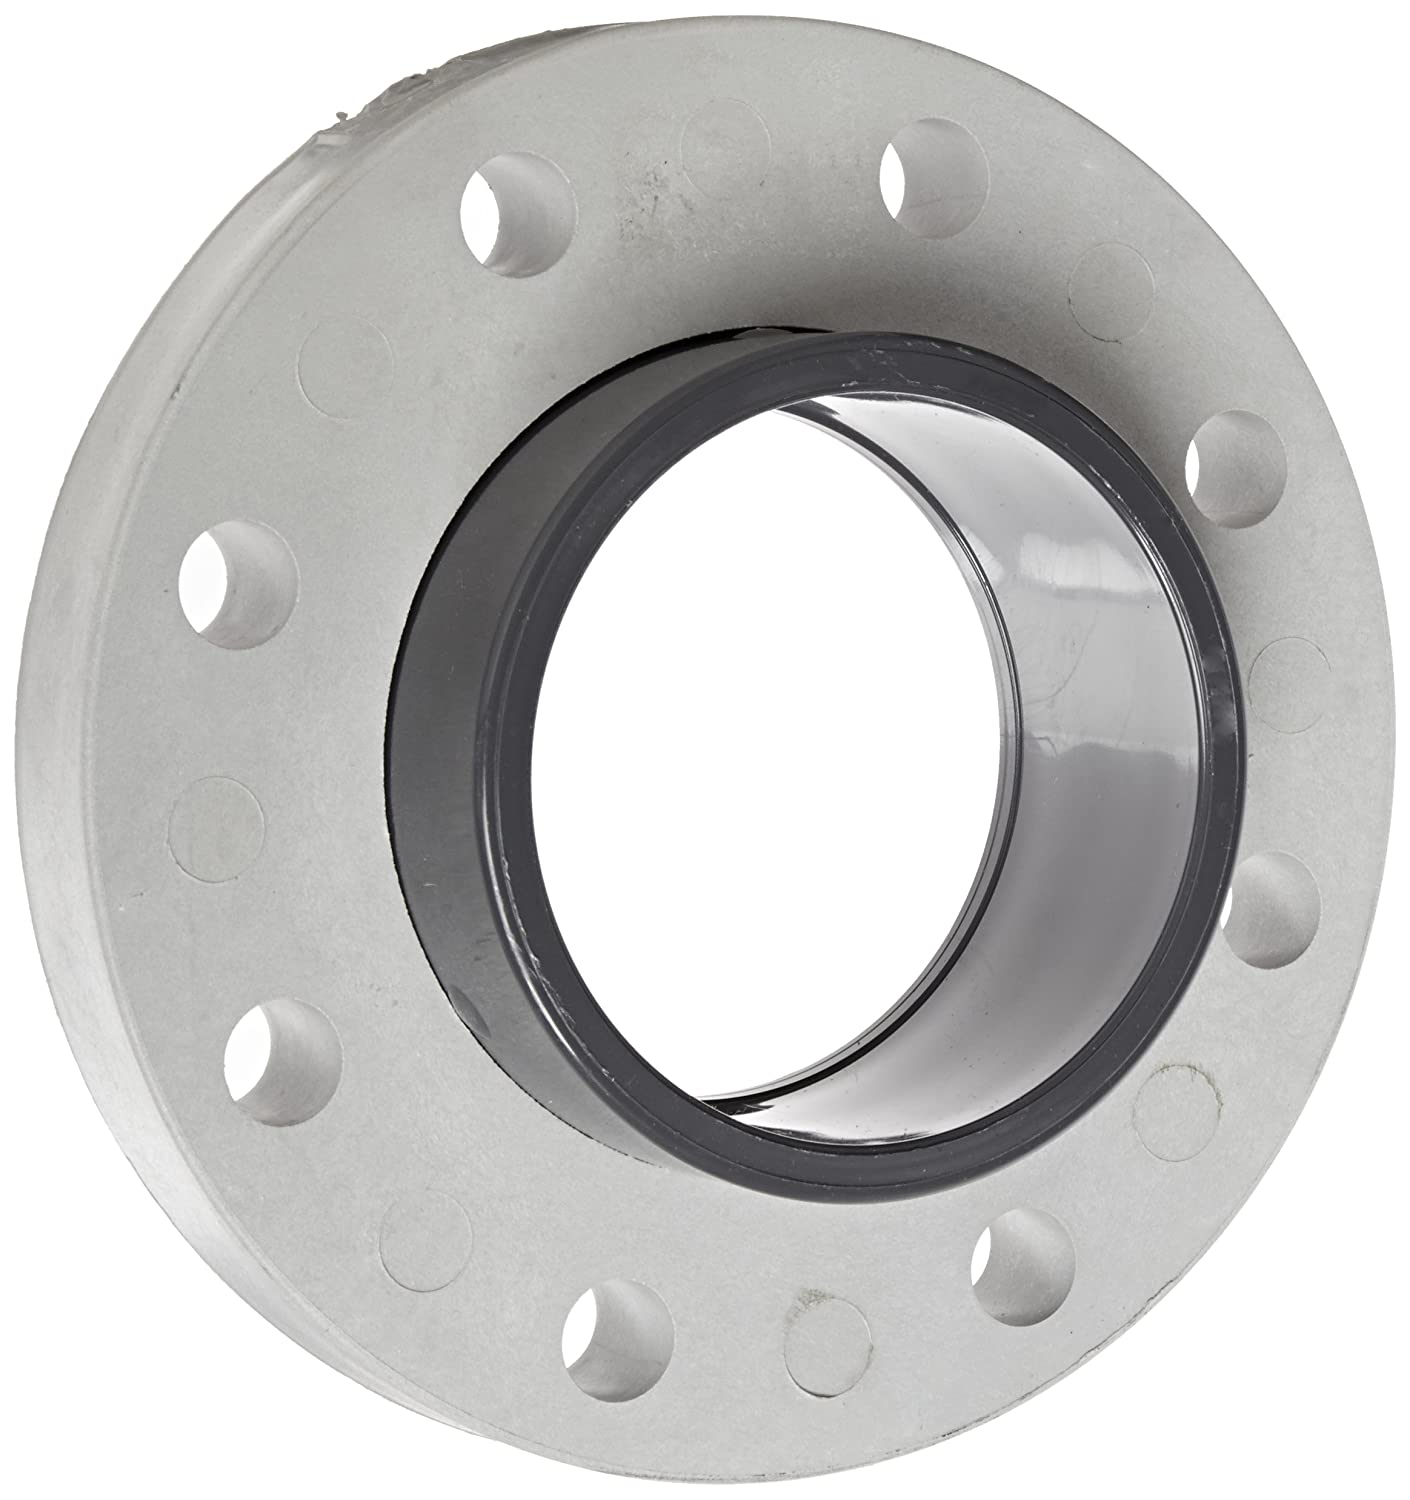 854-040 - Glass-Filled PVC Pipe Fitting, Van Stone Flange, Class 150, Schedule 80, 4" Socket